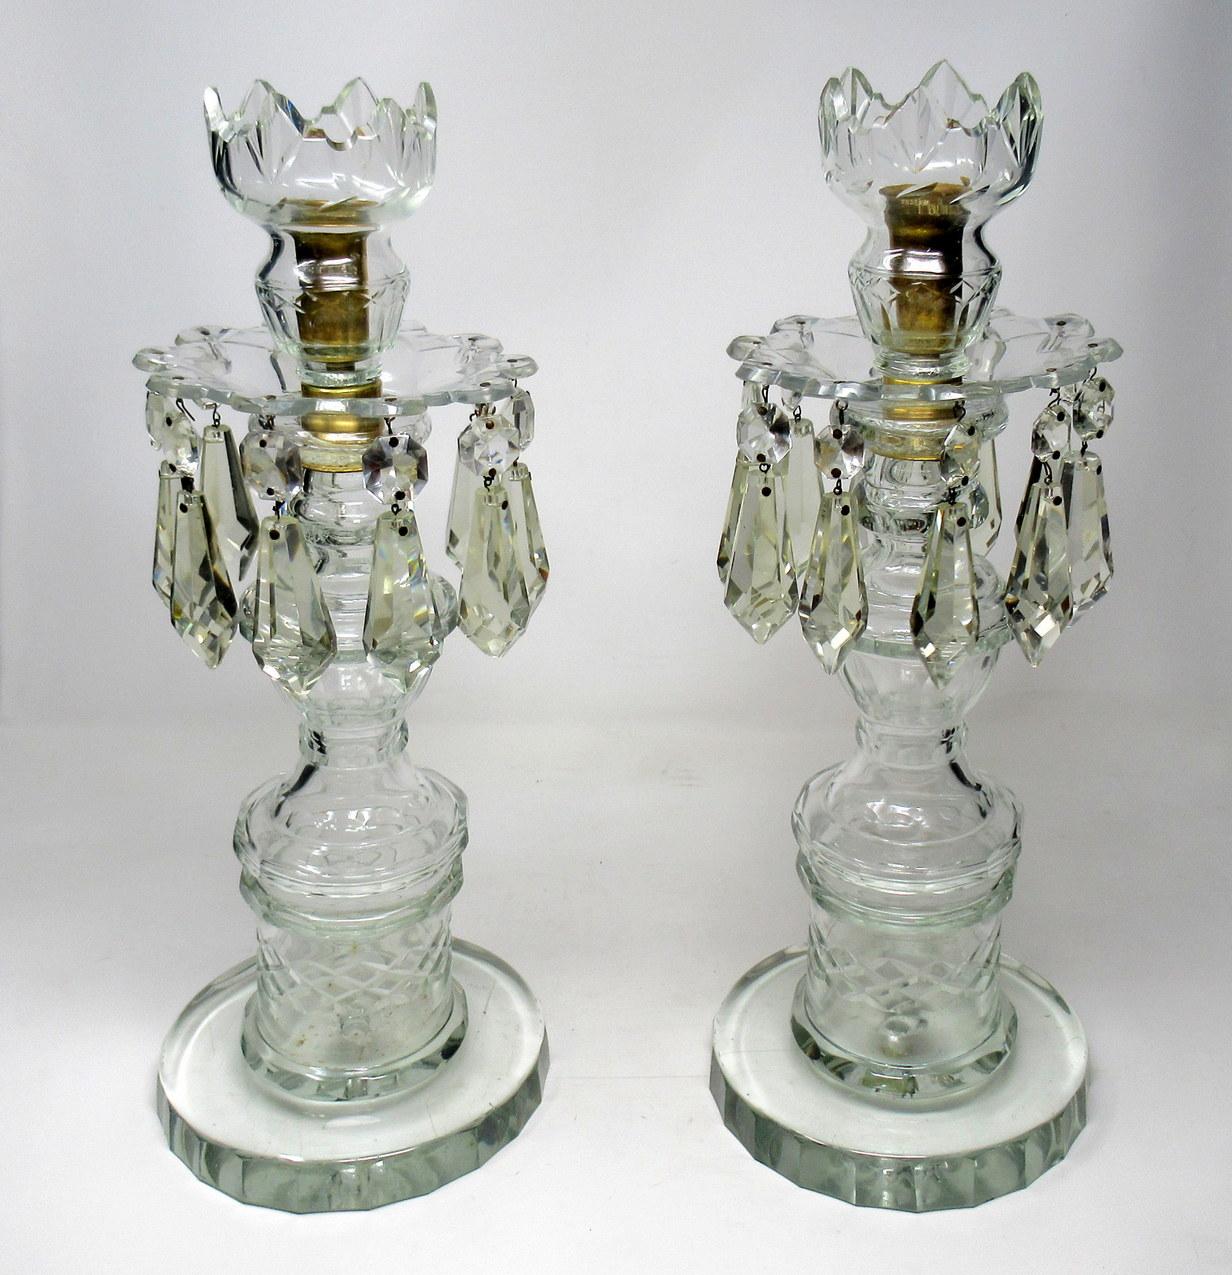 A stunning and imposing pair of Irish old Waterford glass handcut full lead crystal single light candlesticks lustres of outstanding quality, first half of the 19th century.

The central waisted support above a decorative socle ending on a deep